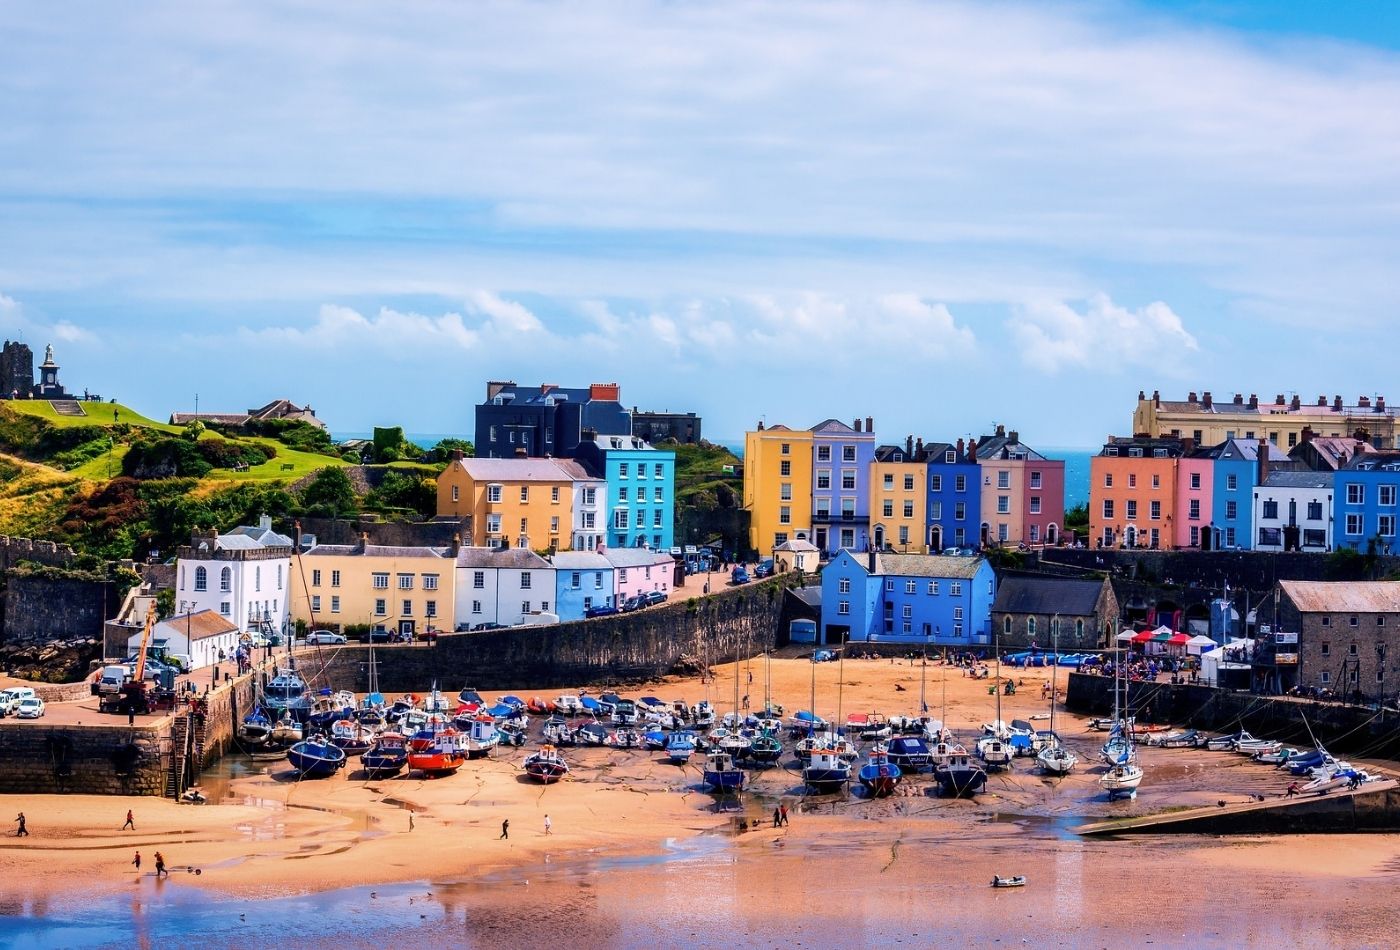 Towns in Pembrokeshire